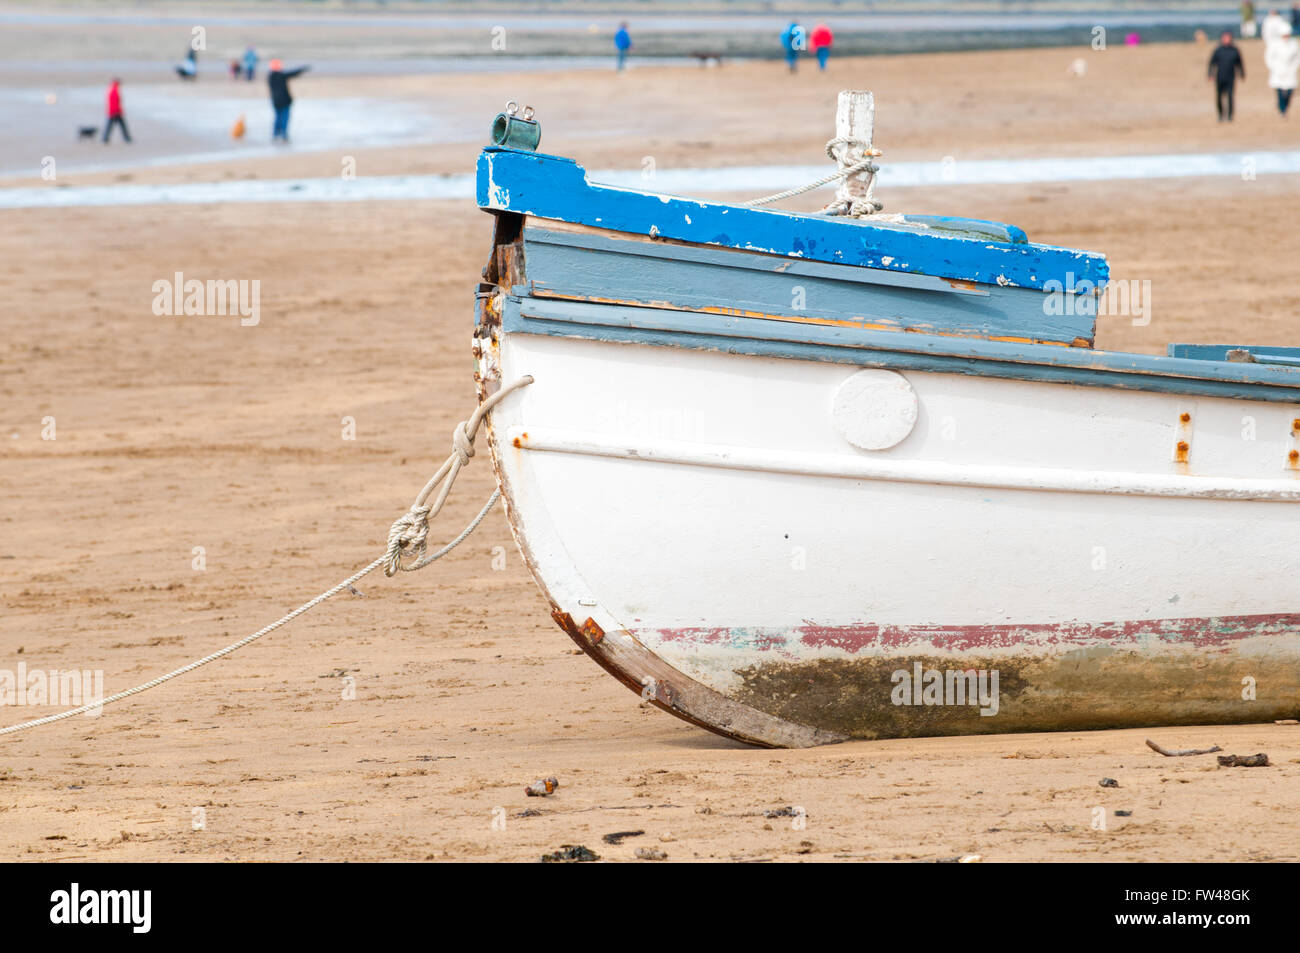 An old fishing boat moored on the beach at low tide Stock Photo